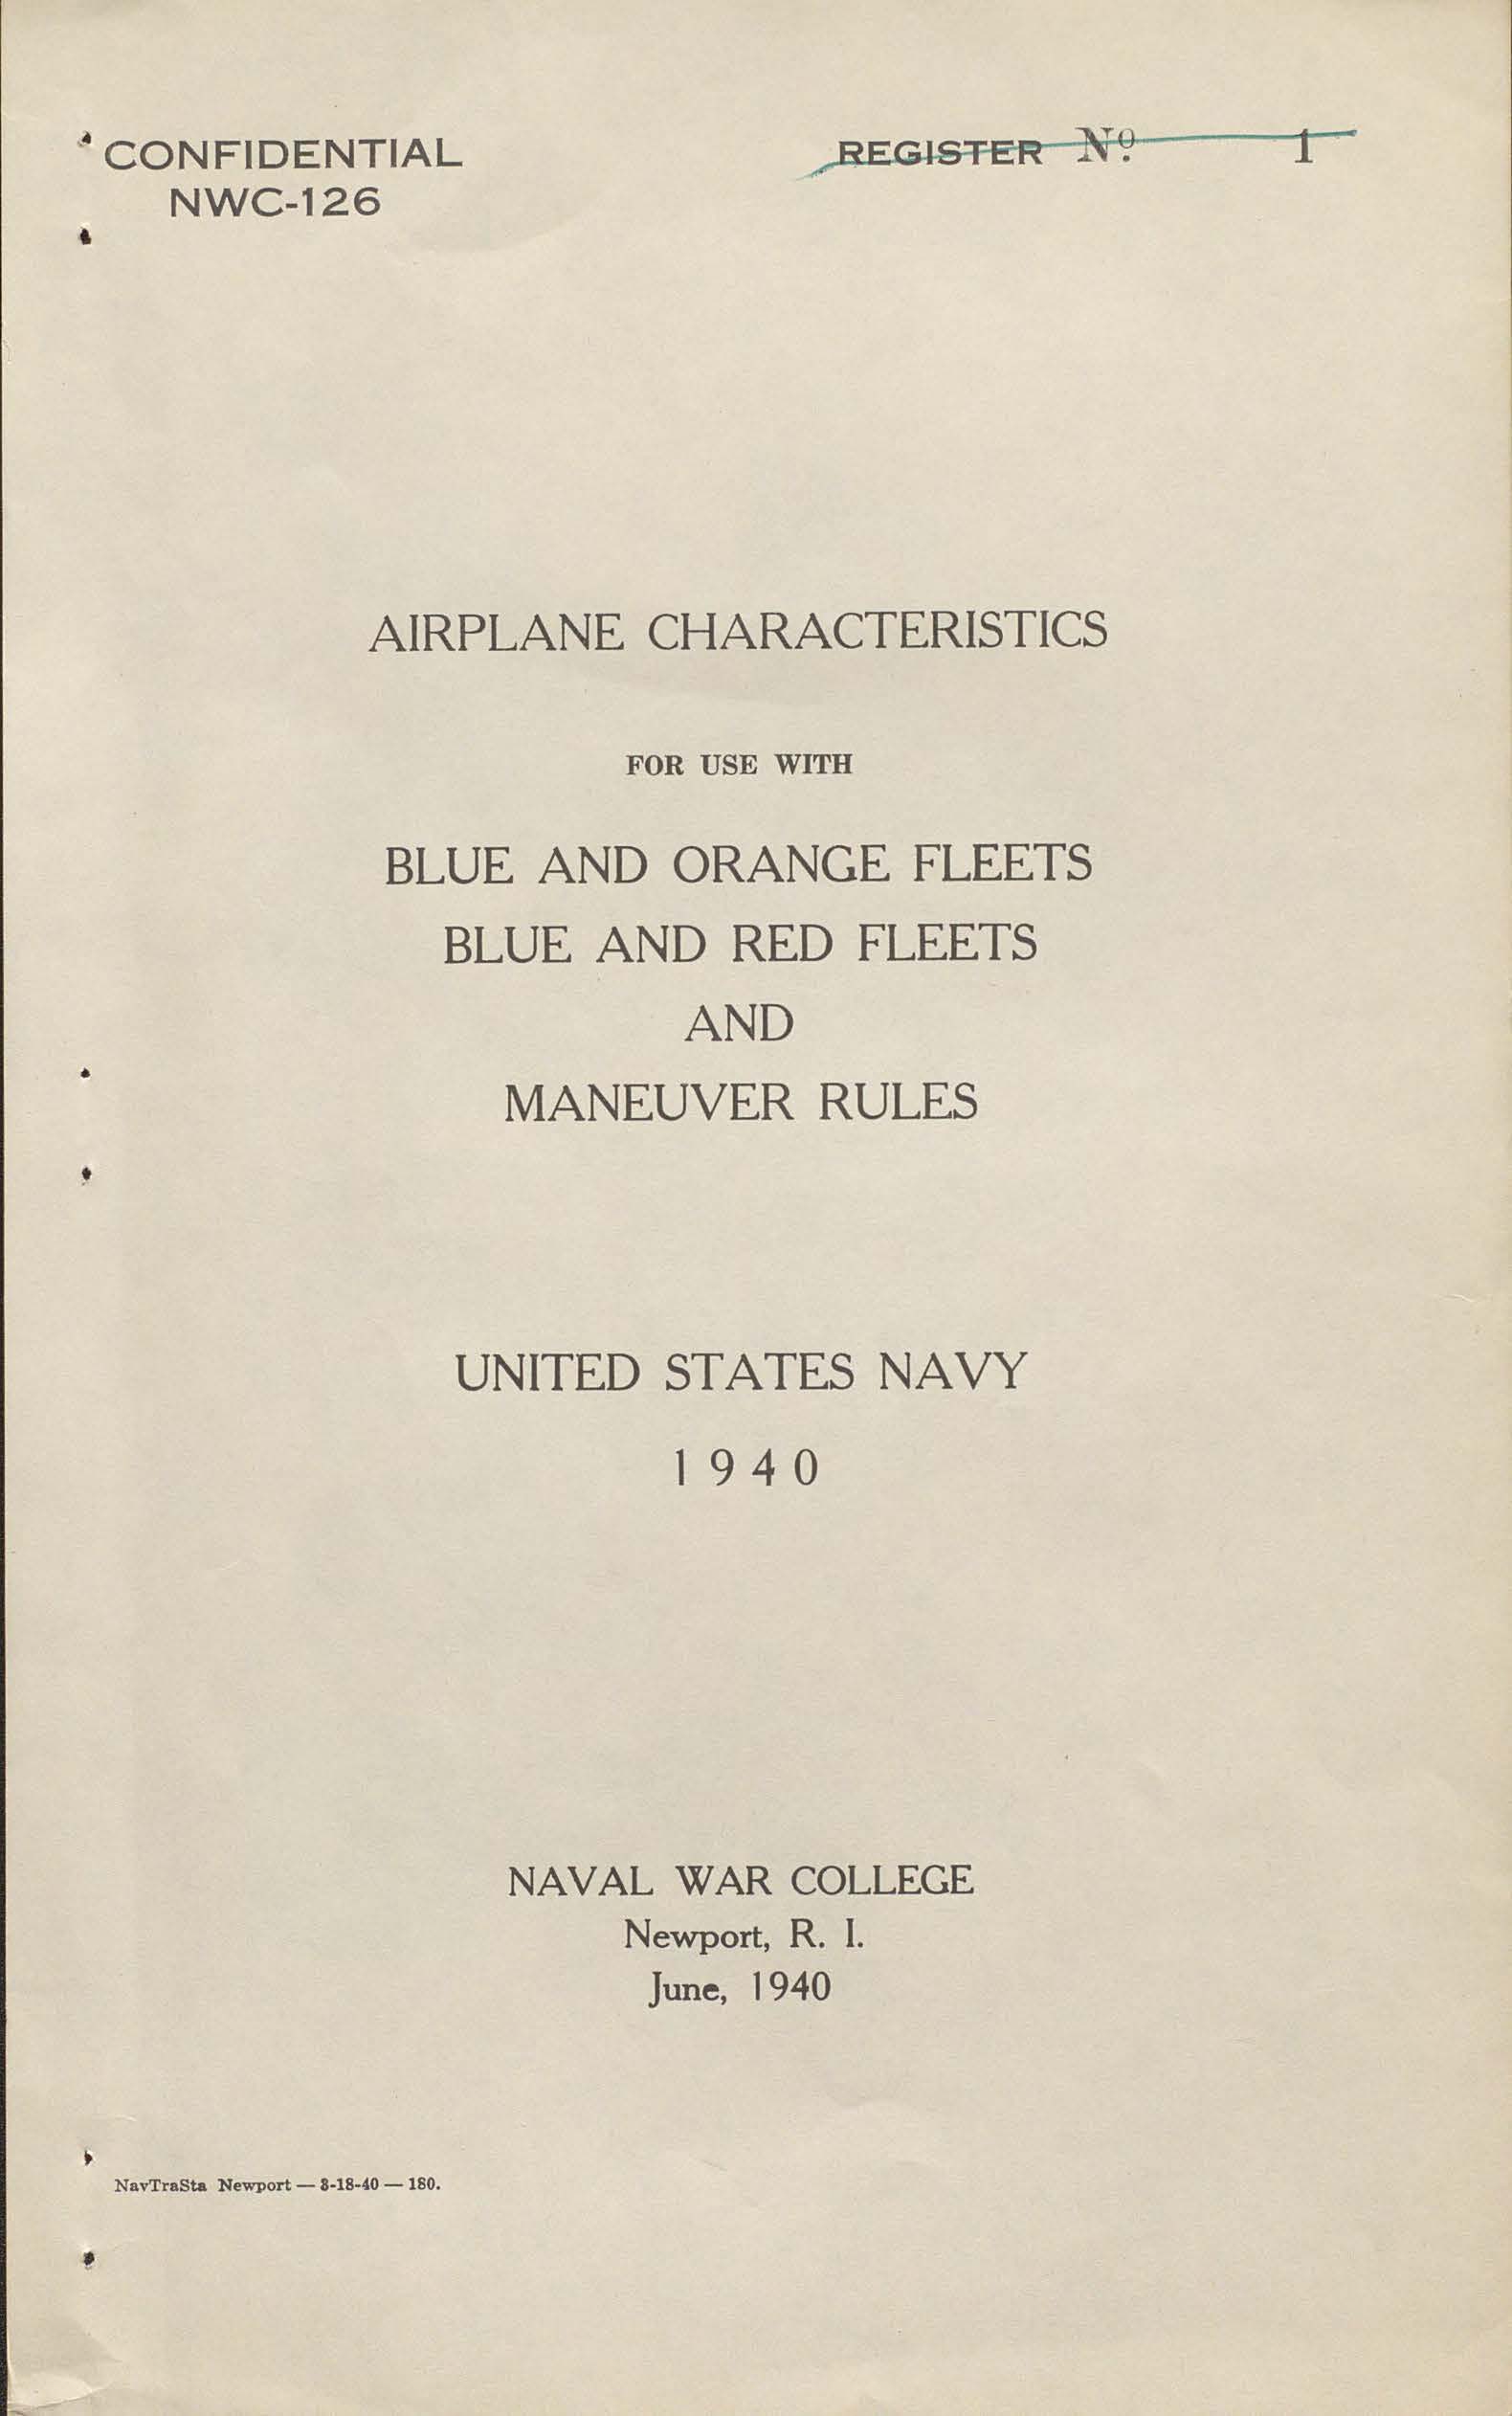 Airplane Characteristics for use with Blue and Orange Fleets, Blue and Red Fleets, and Maneuver Rules